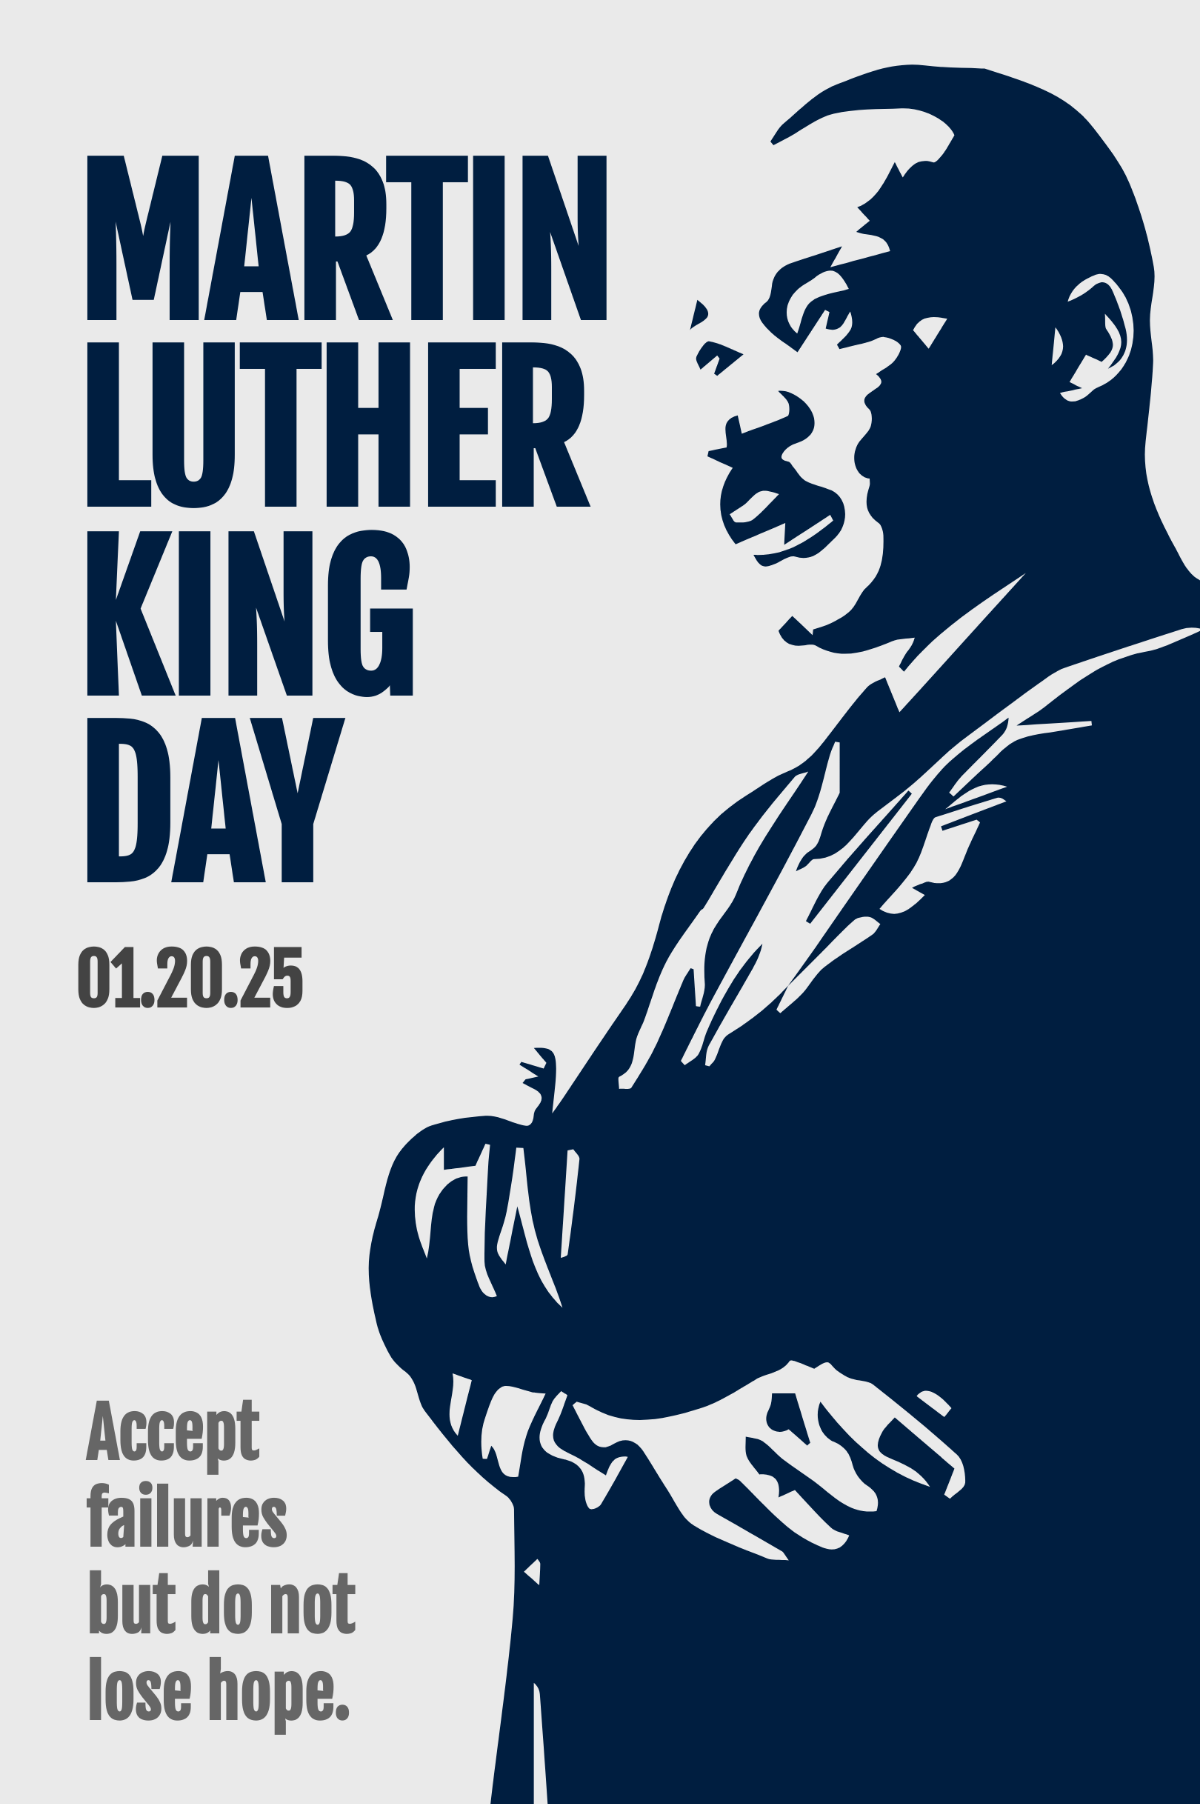 Martin Luther King Day Tumblr Post